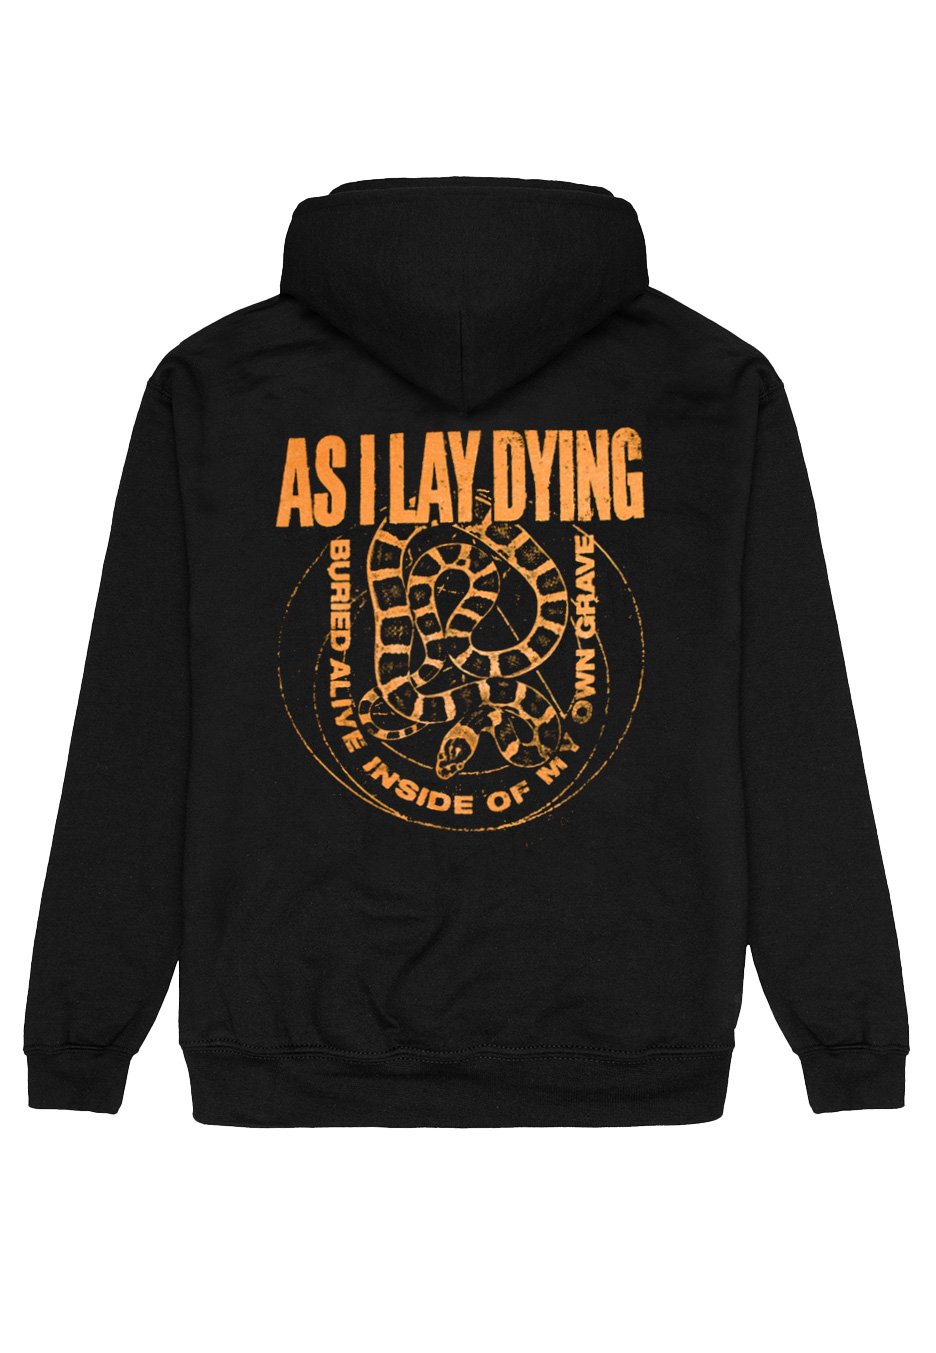 As I Lay Dying - MOG Snake - Hoodie